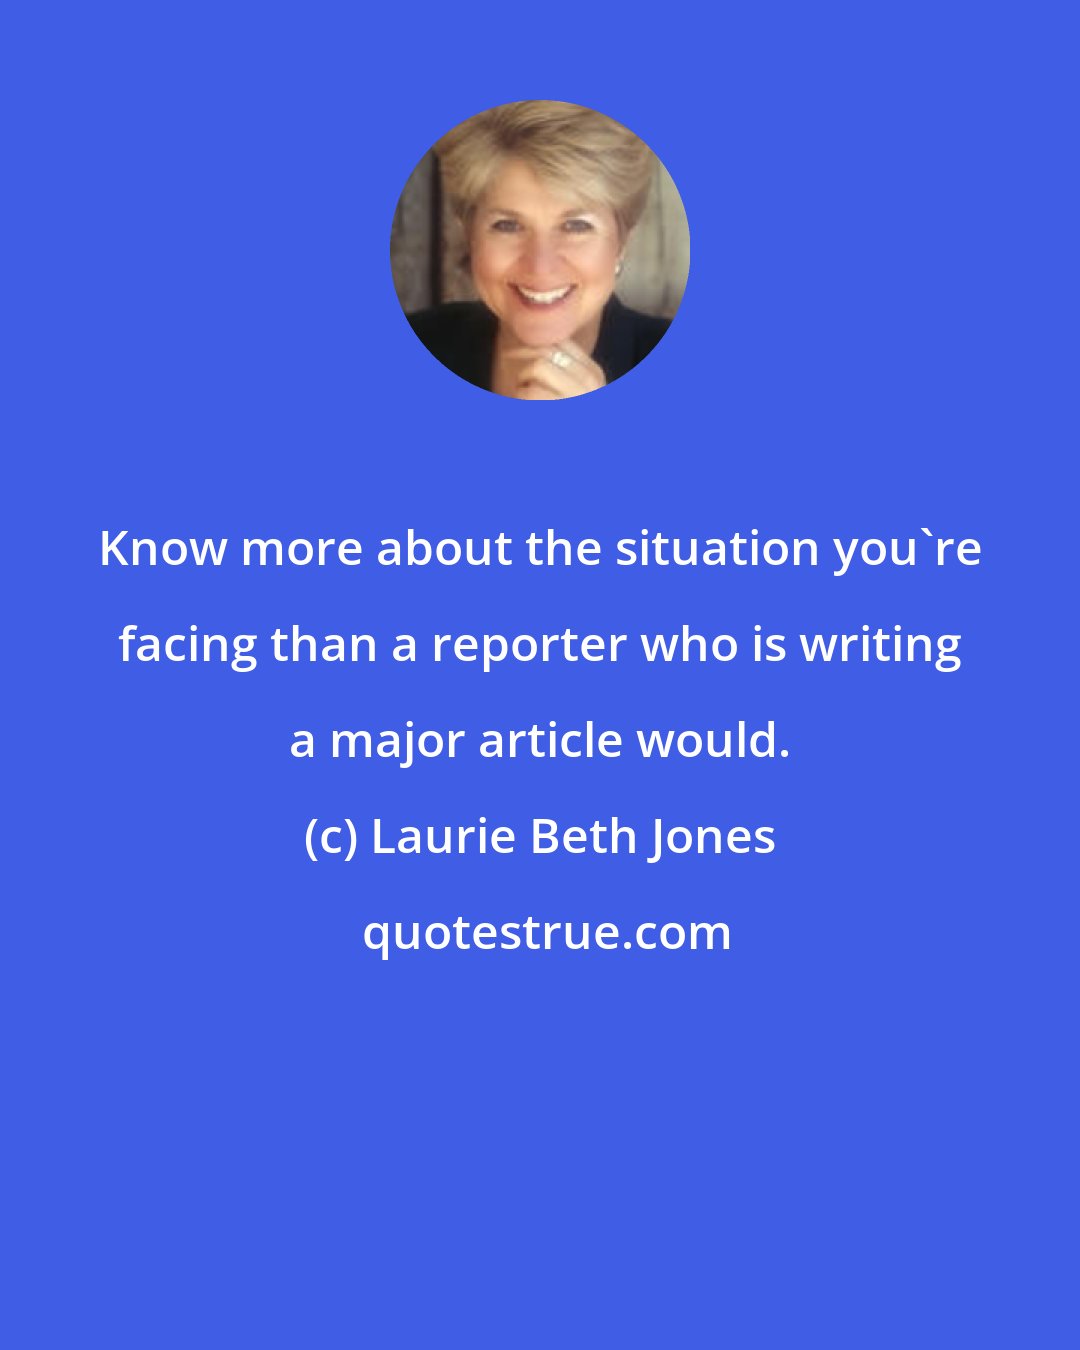 Laurie Beth Jones: Know more about the situation you're facing than a reporter who is writing a major article would.